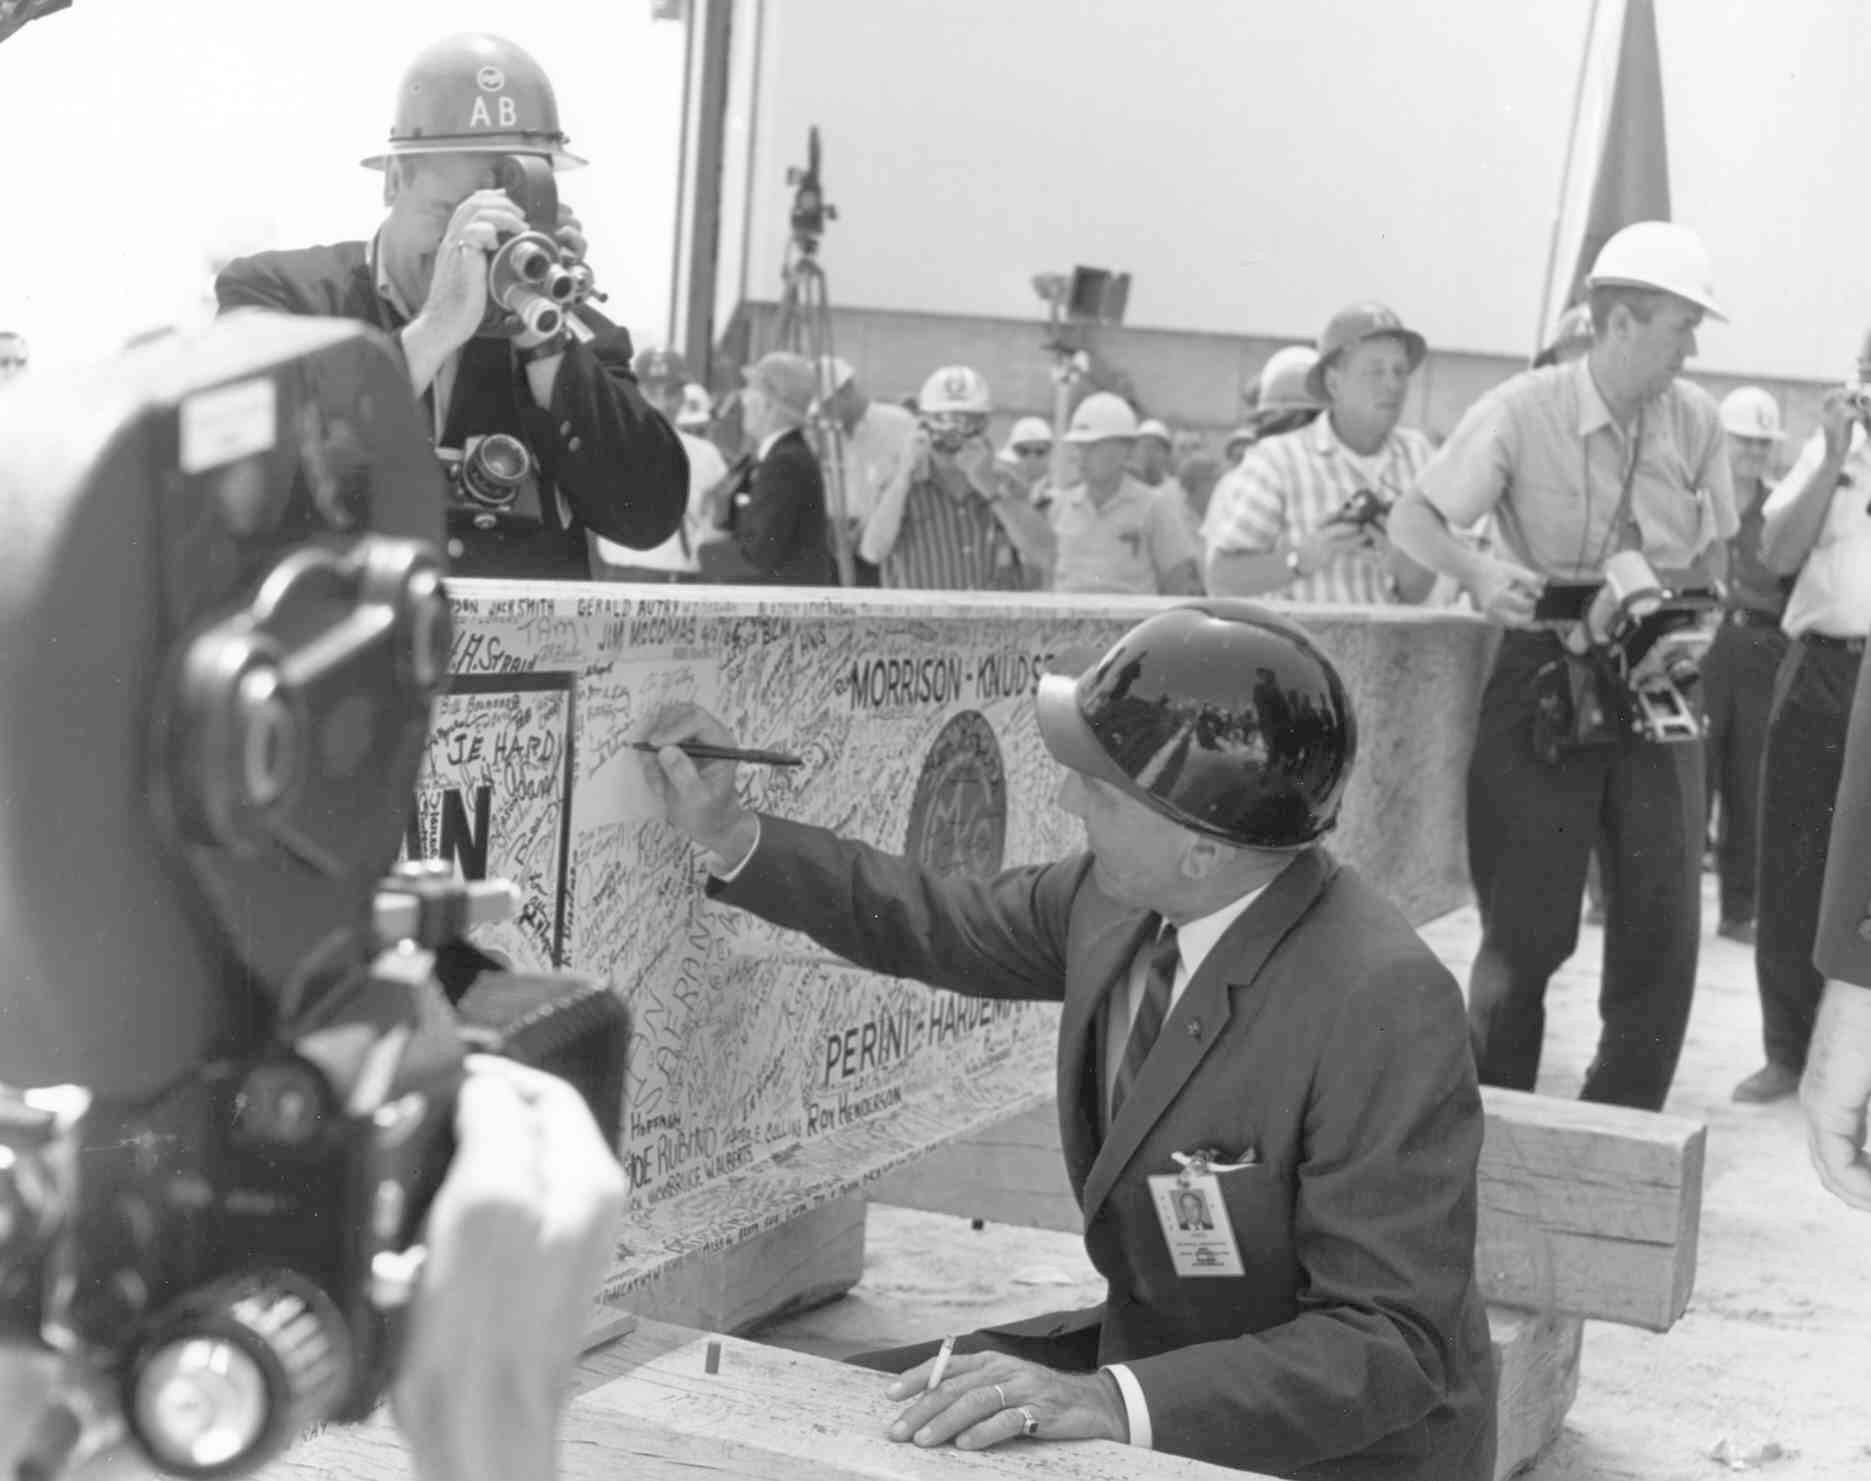 Dr. Kurt H. Debus, Kennedy Space Center’s first director, adds his name to the steel beam used in the VAB topping off ceremony.